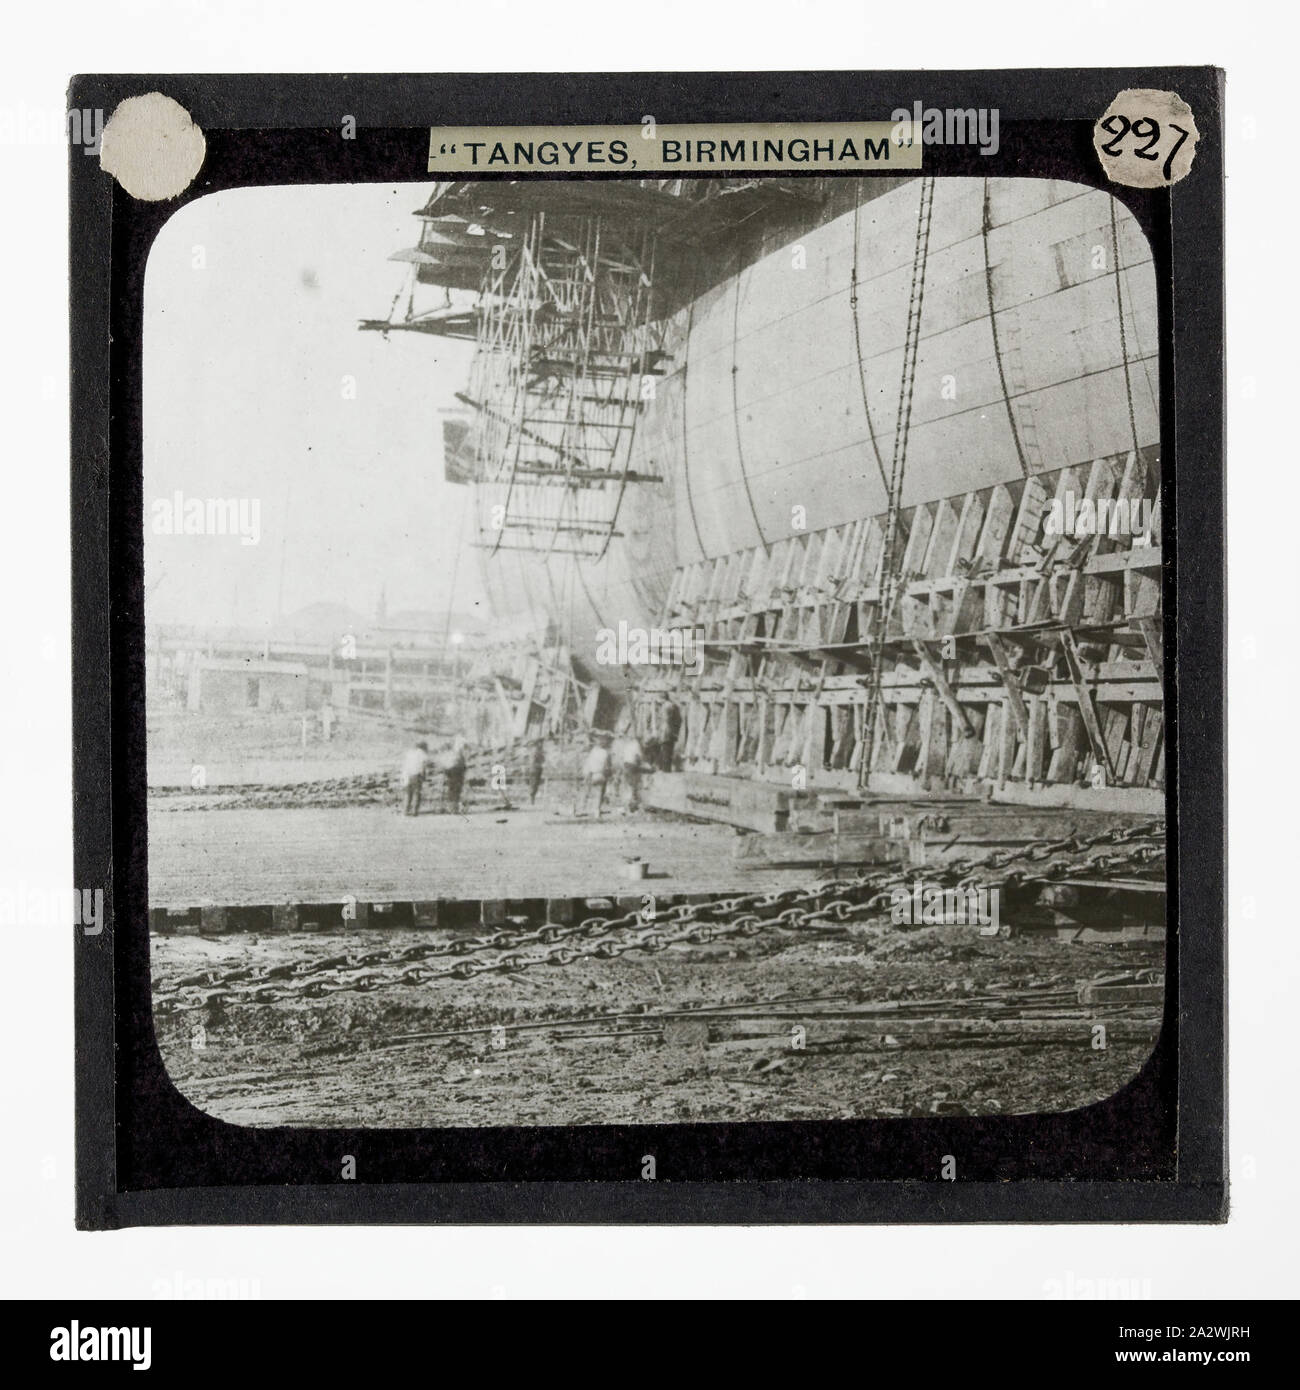 Lantern Slide - Tangyes Ltd, Launching of SS Great Eastern, circa 1910, One of 239 glass lantern slides depicting products manufactured by Tangyes Limited engineers of Birmingham, England. The images include various products such as engines, centrifugal pumps, hydraulic pumps, gas producers, materials testing machines, presses, machine tools, hydraulic jacks etc. Tangyes was a company which operated from 1857 to 1957. They produced a wide variety of engineering Stock Photo